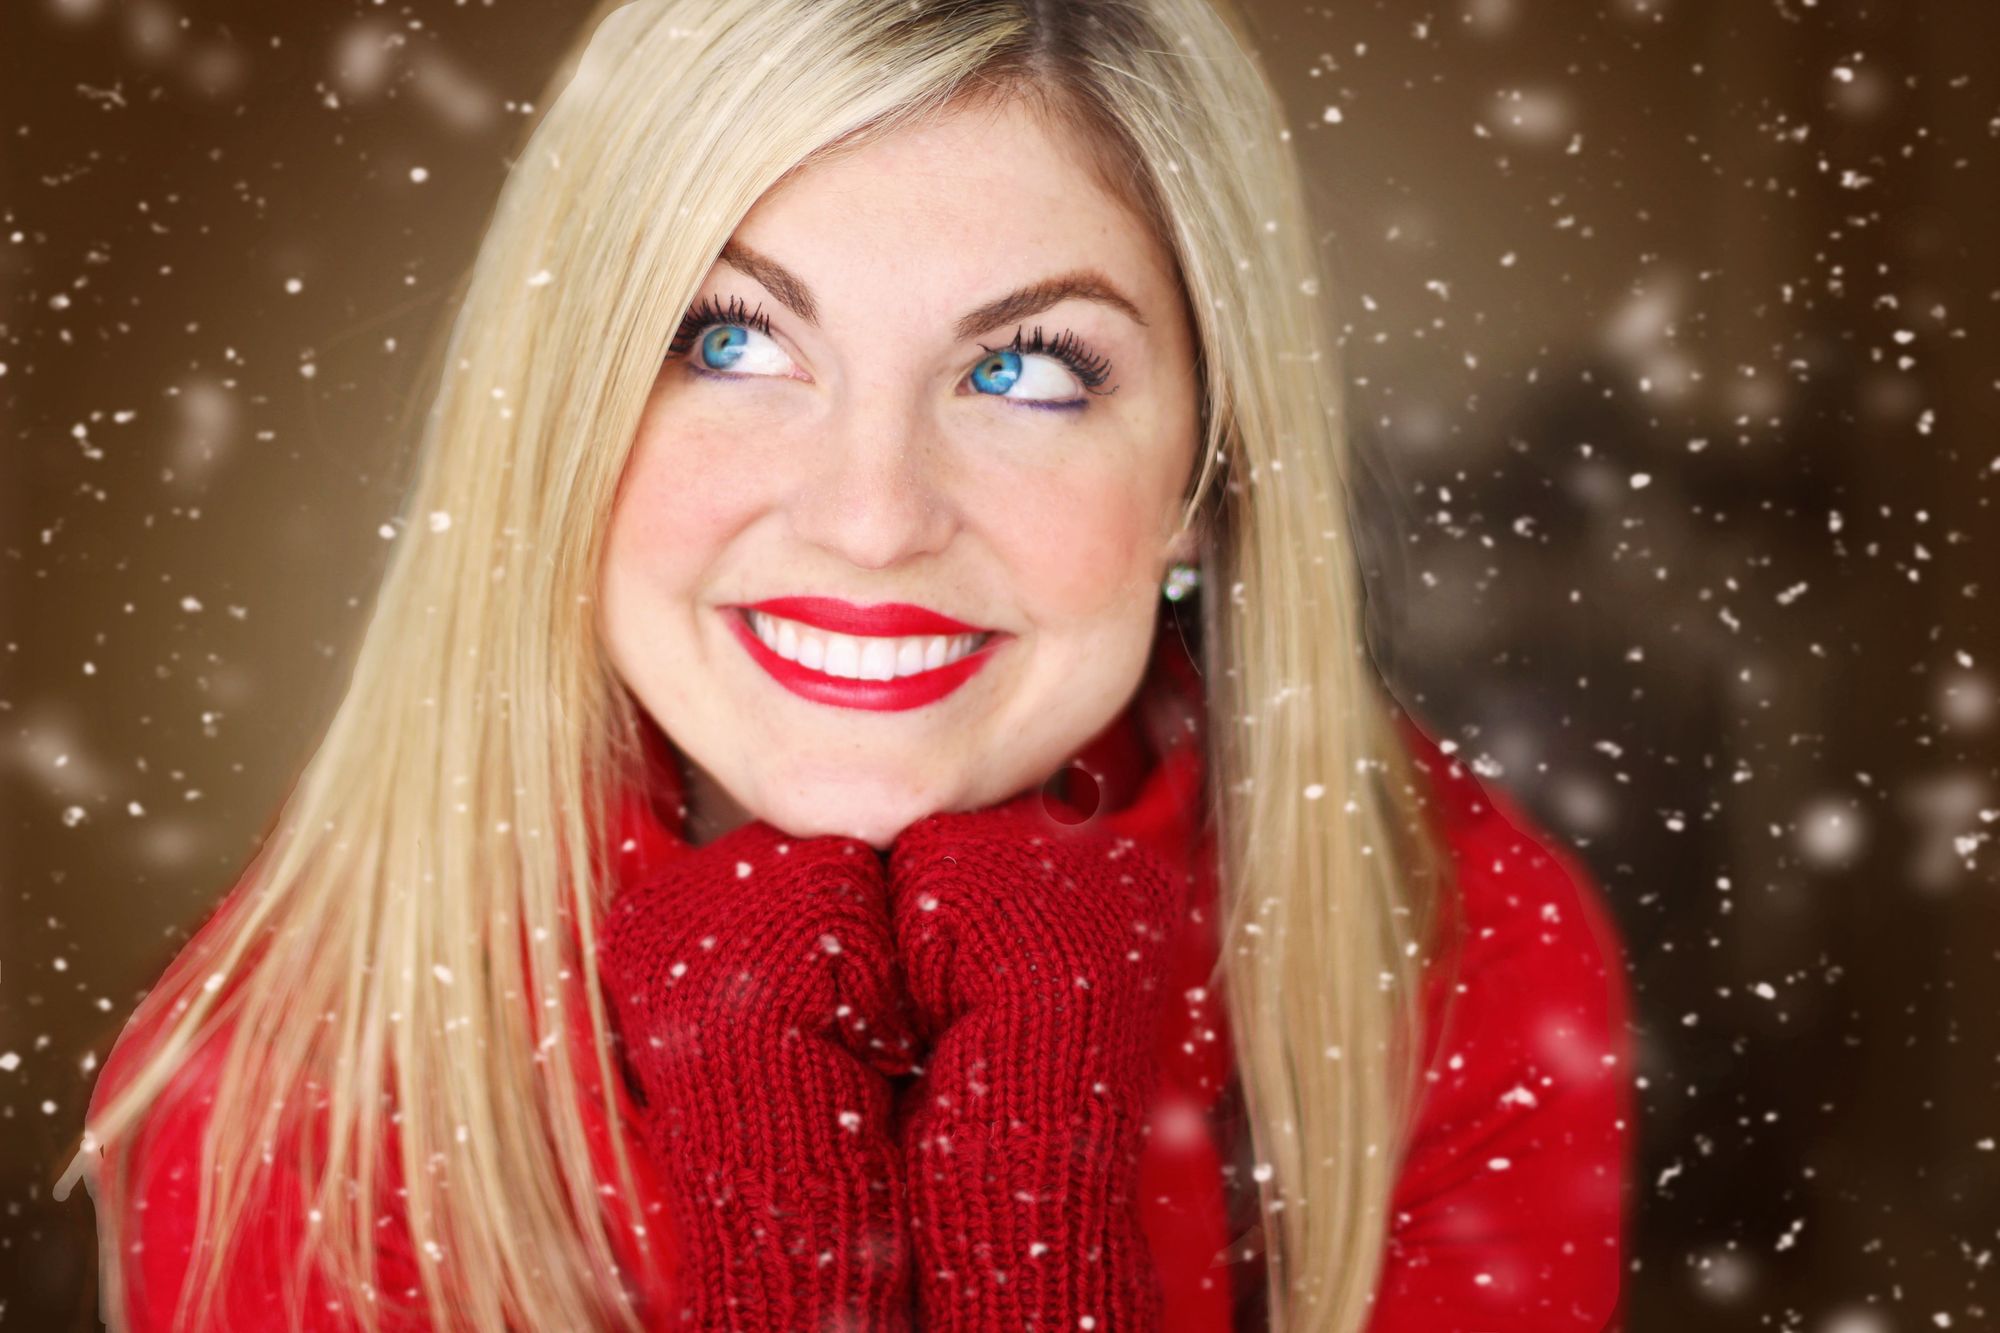 Blonde in red sweater smiling in the snow. Finding The Best Serum For Glowing Skin